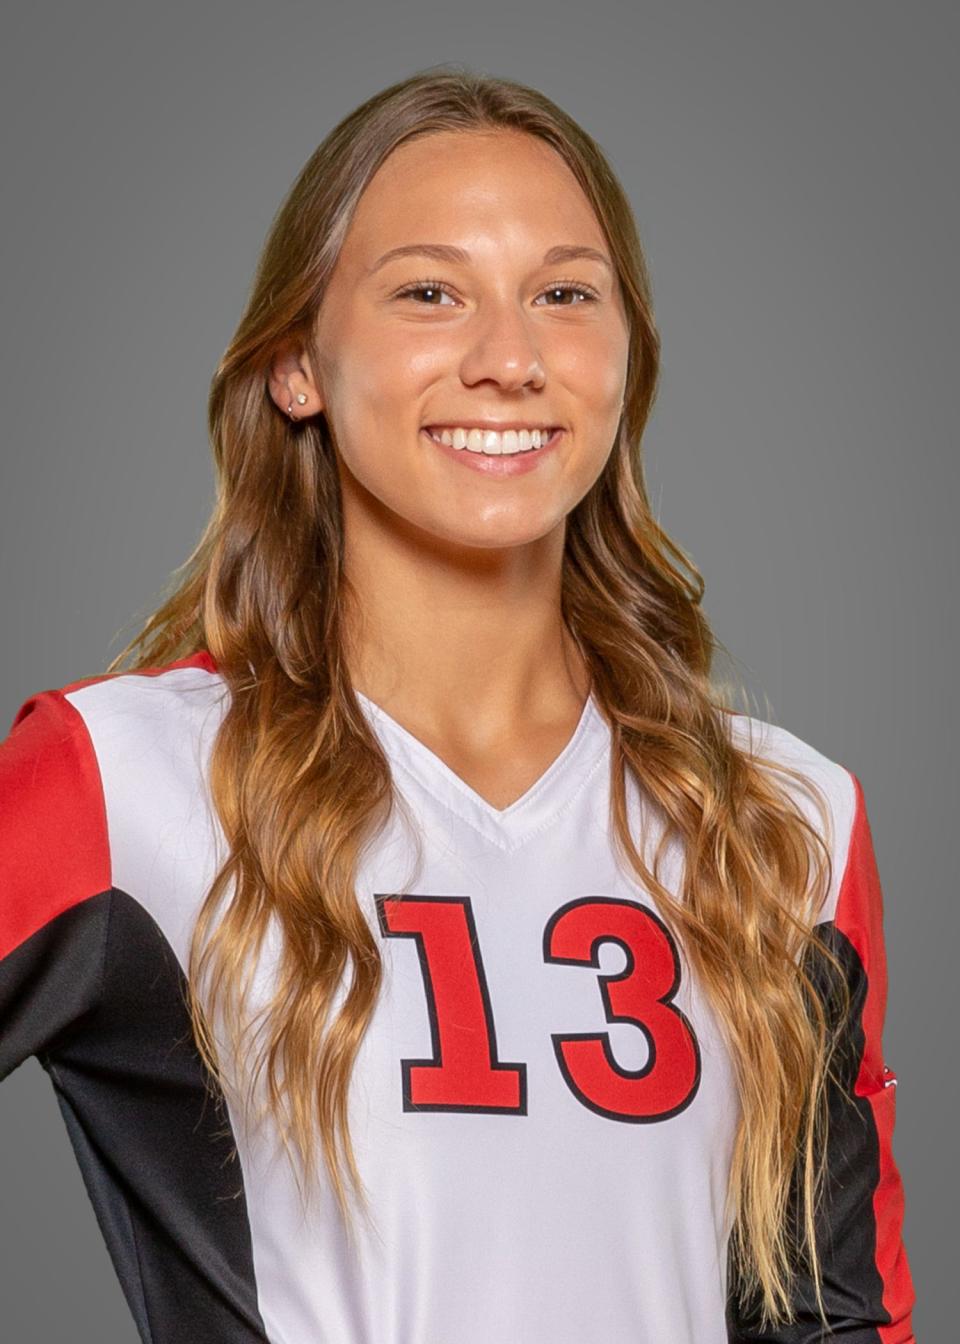 Forreston's Kara Erdmann, who originally committed to play for Michigan State, will play NCAA Division I volleyball for UW-Milwaukee after Michigan State changed coaches.